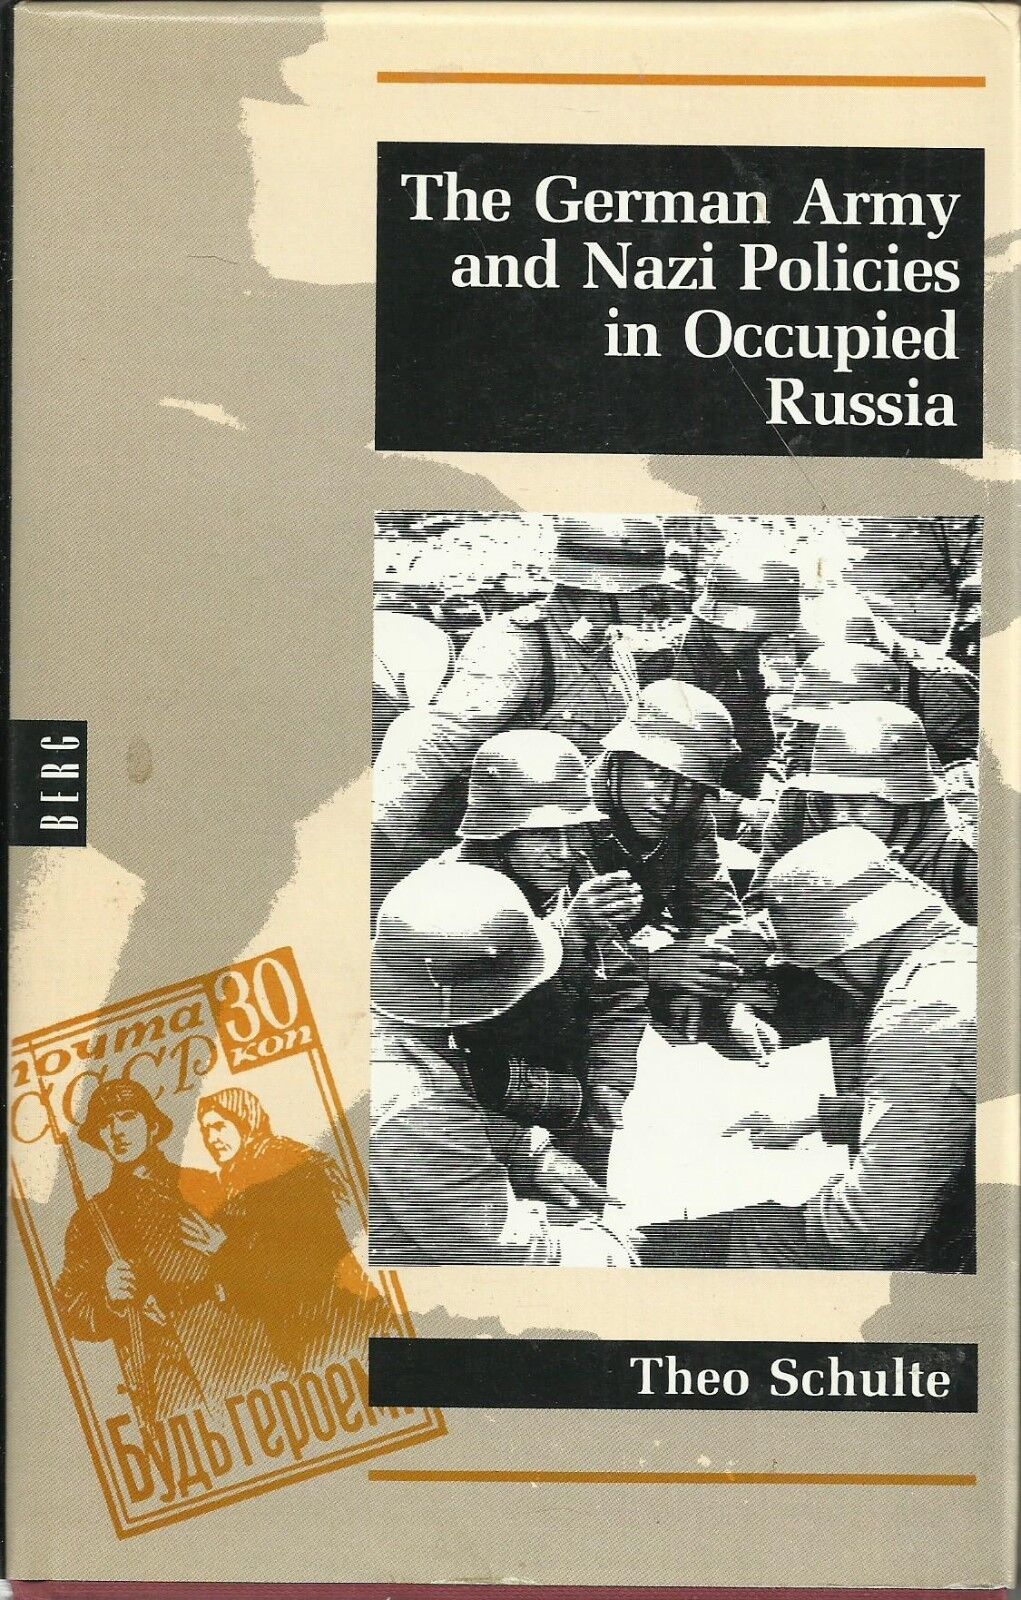 The German Army And Nazi Policies In Occupied Russia By Theo Schulte